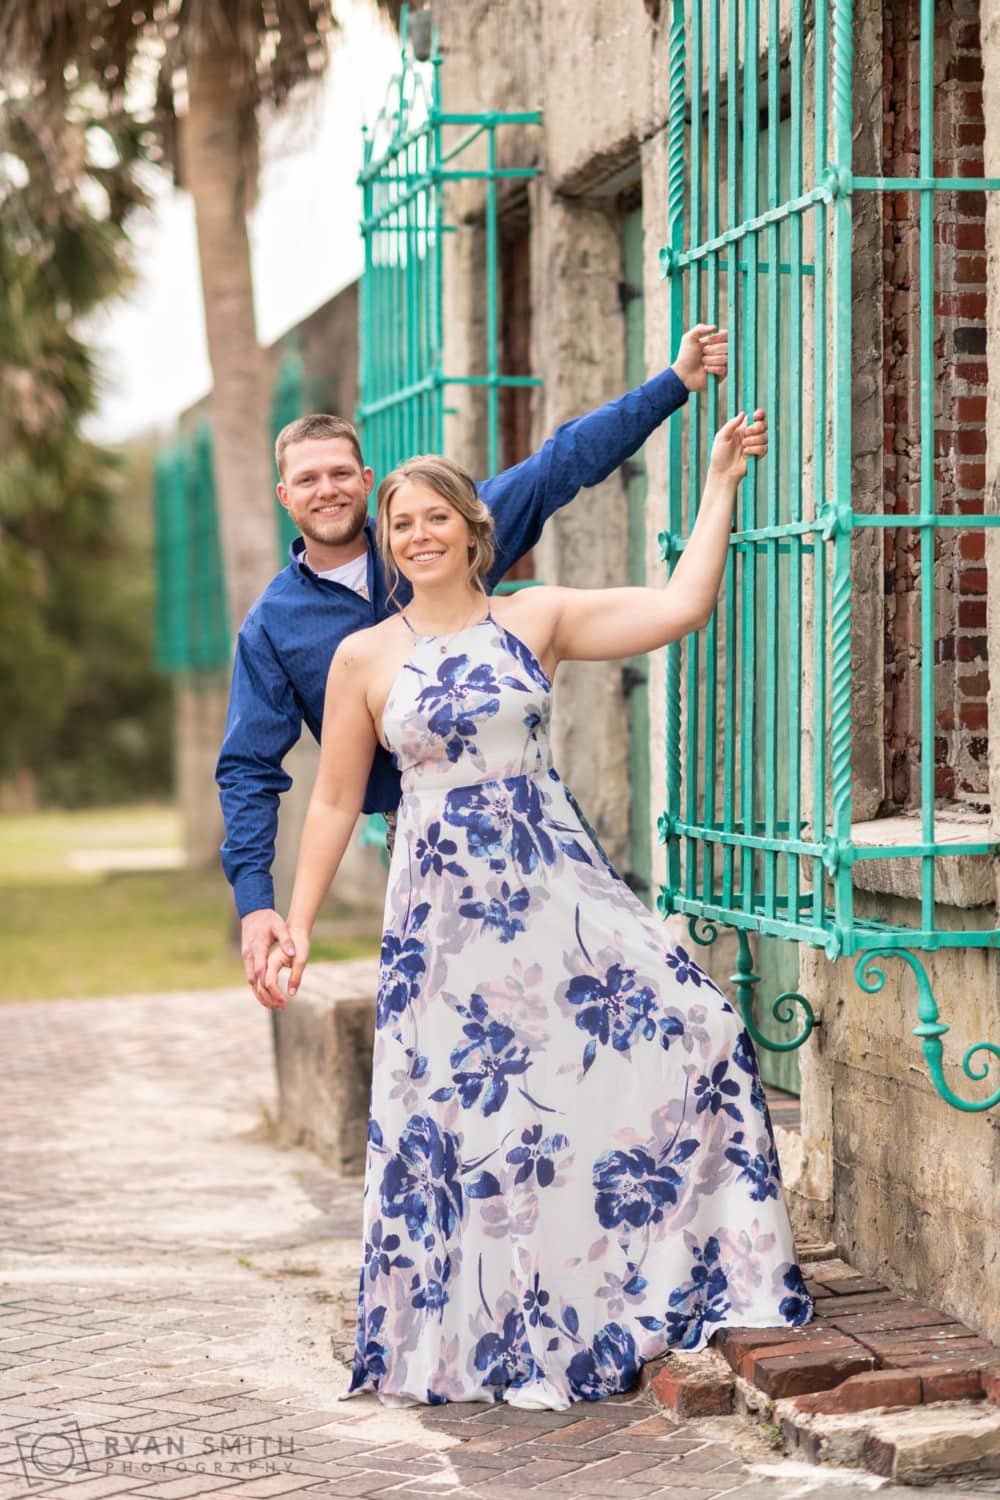 Holding hands by the castle window - Atalaya Castle - Pawleys Island